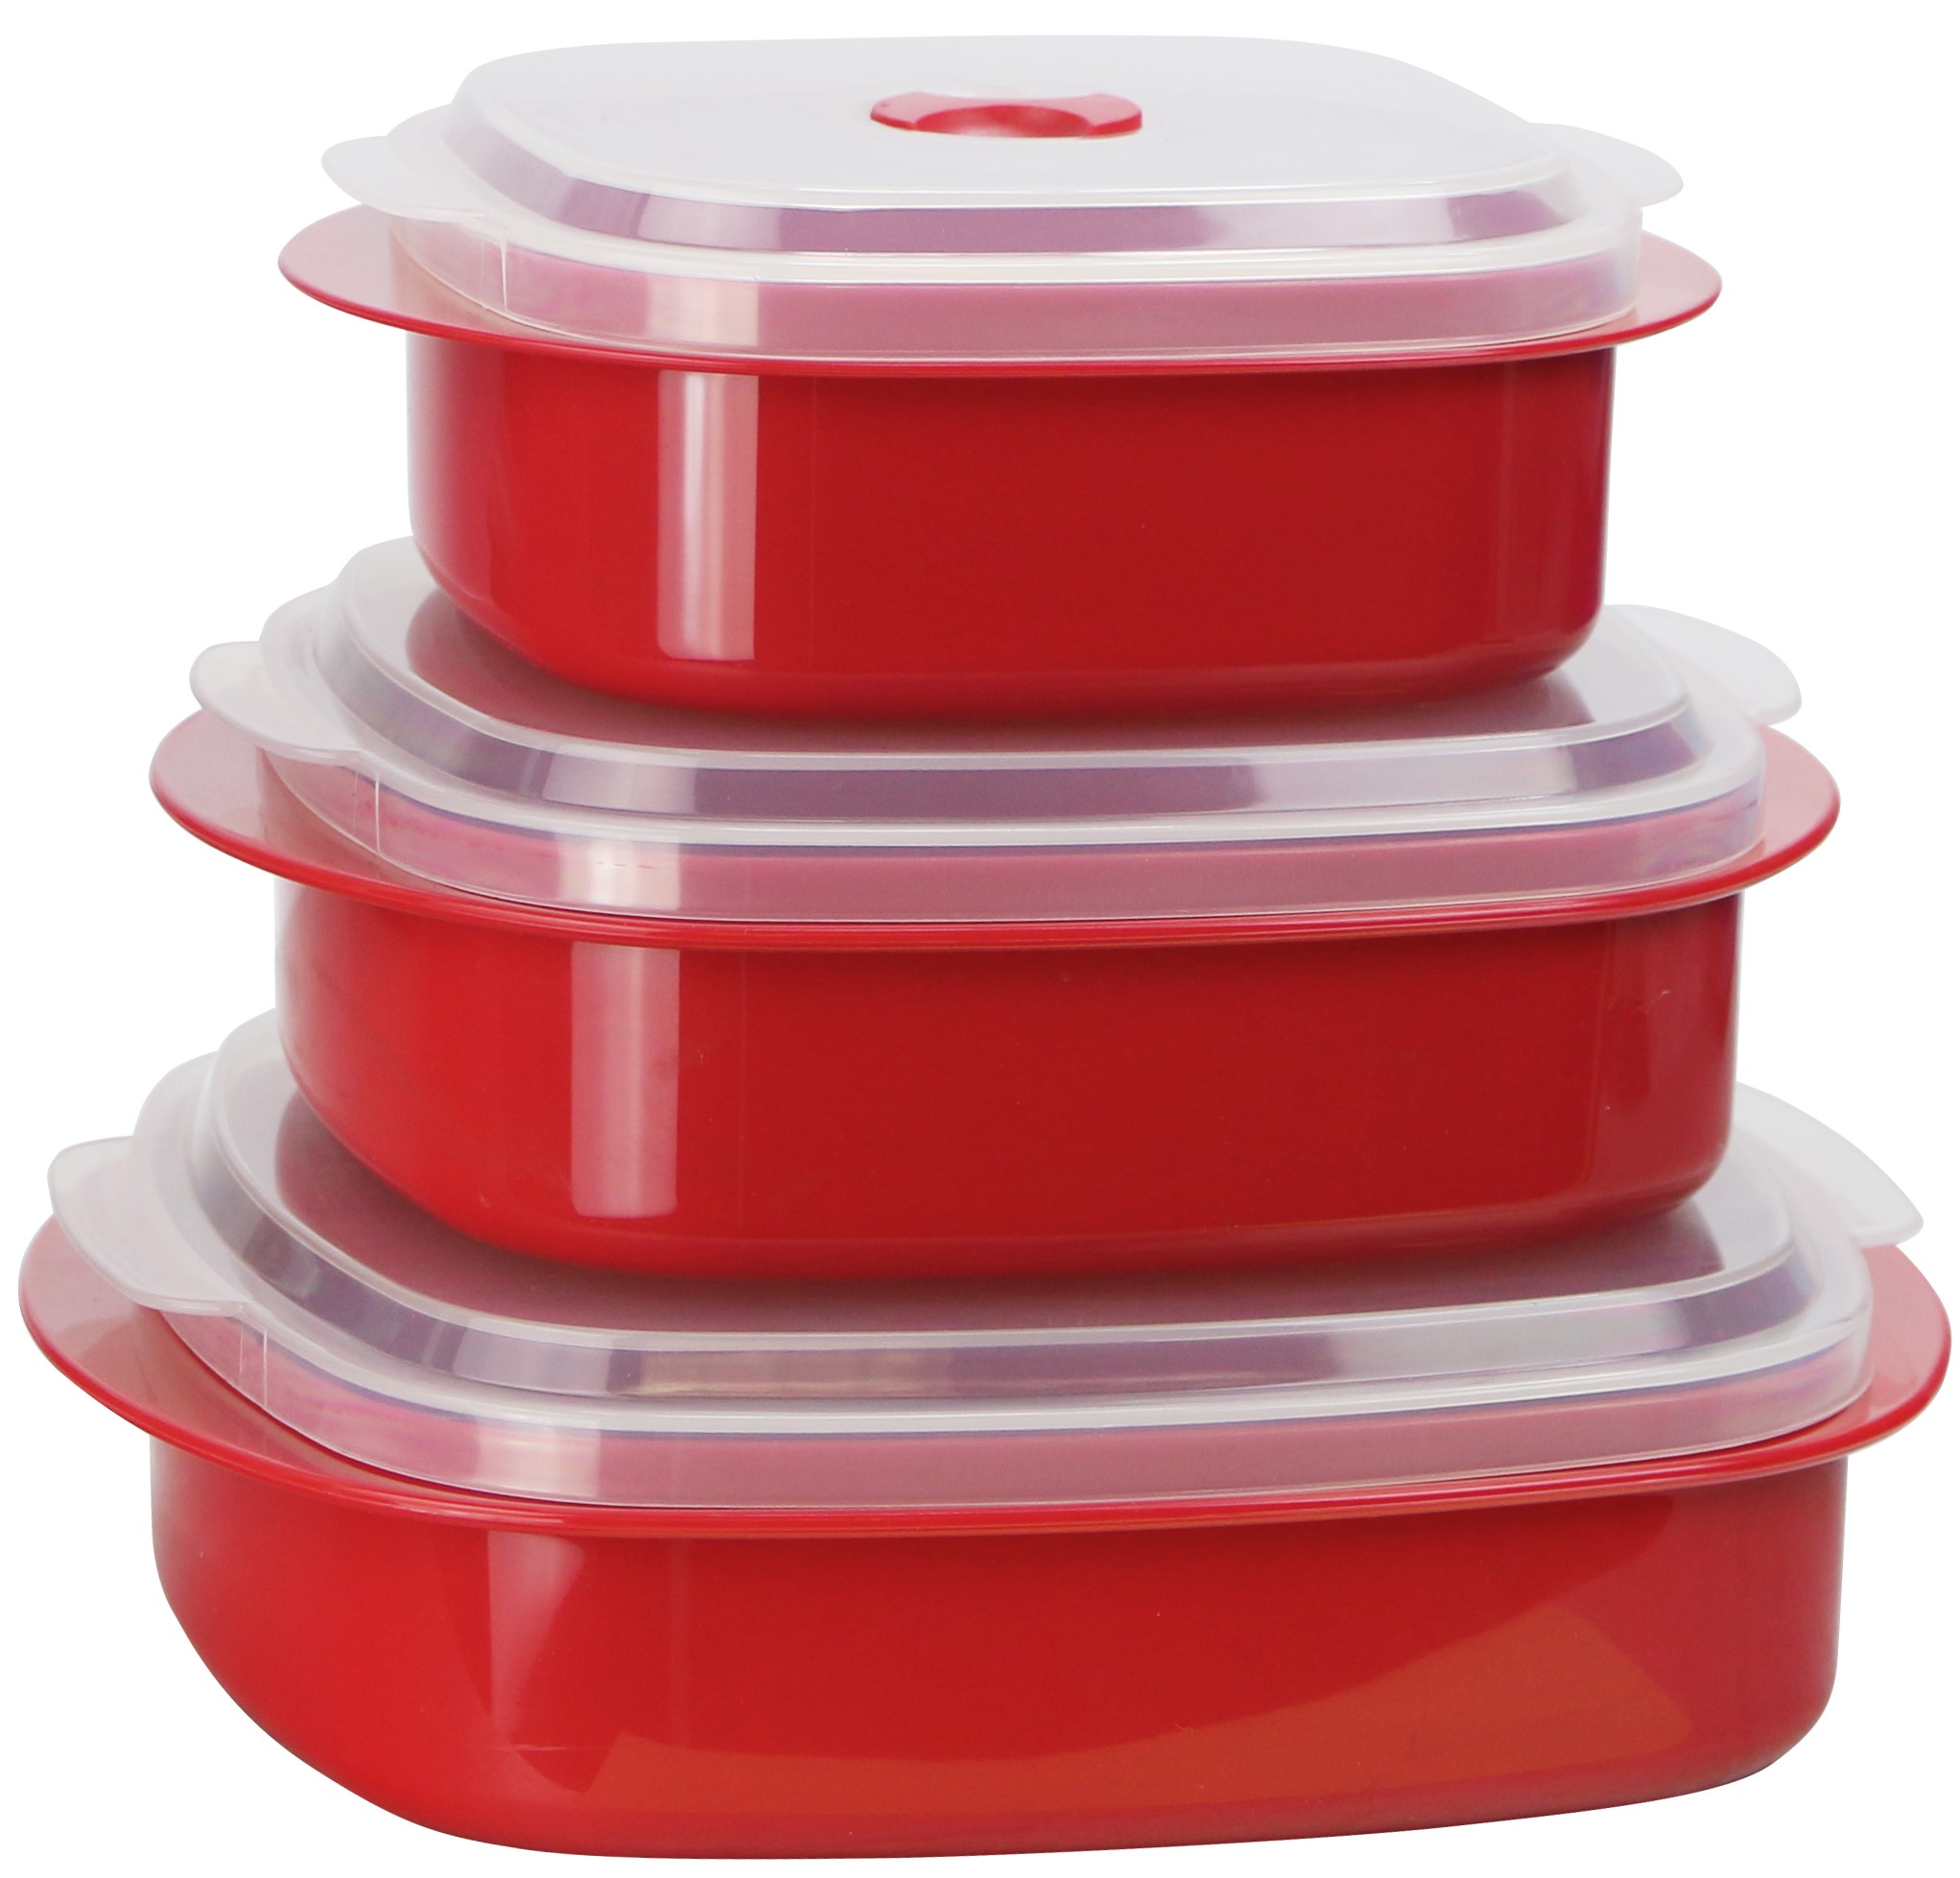 Picture of Reston Lloyd 20600 Microwave Cookware Set  Red